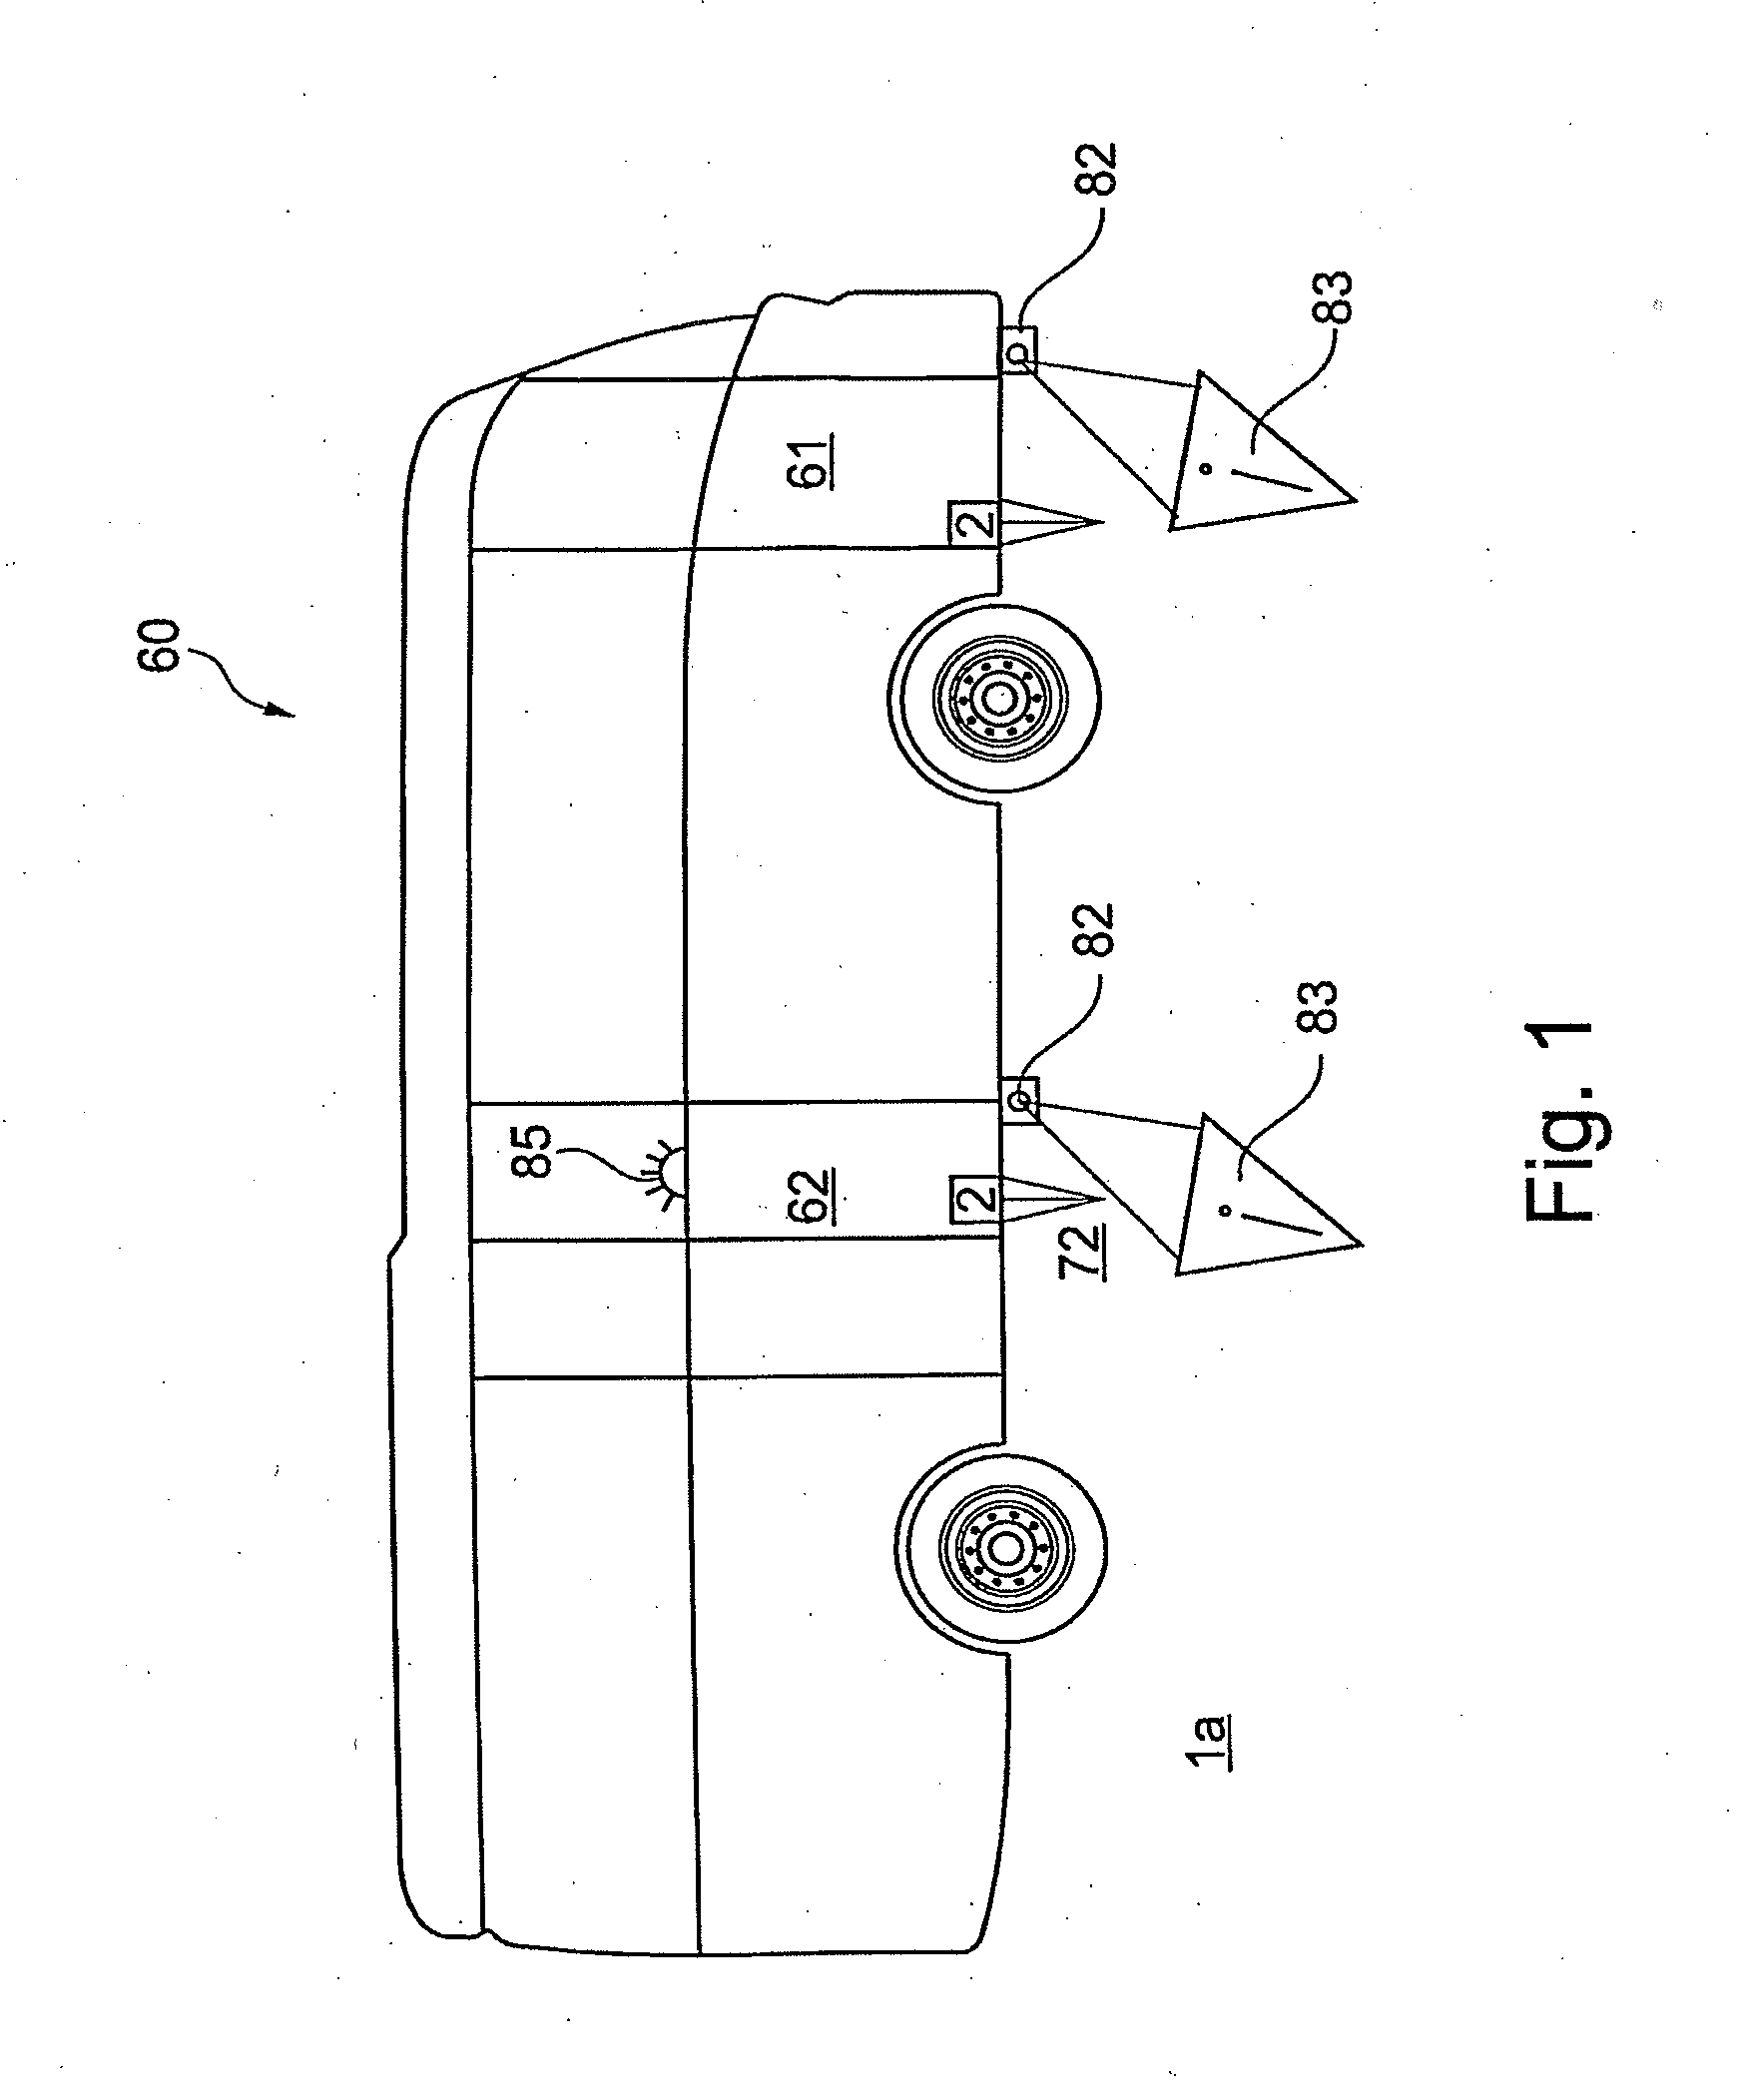 Device and Method for Outputting a Signal When There is a Hazardous Underlying Surface Under a Vehicle